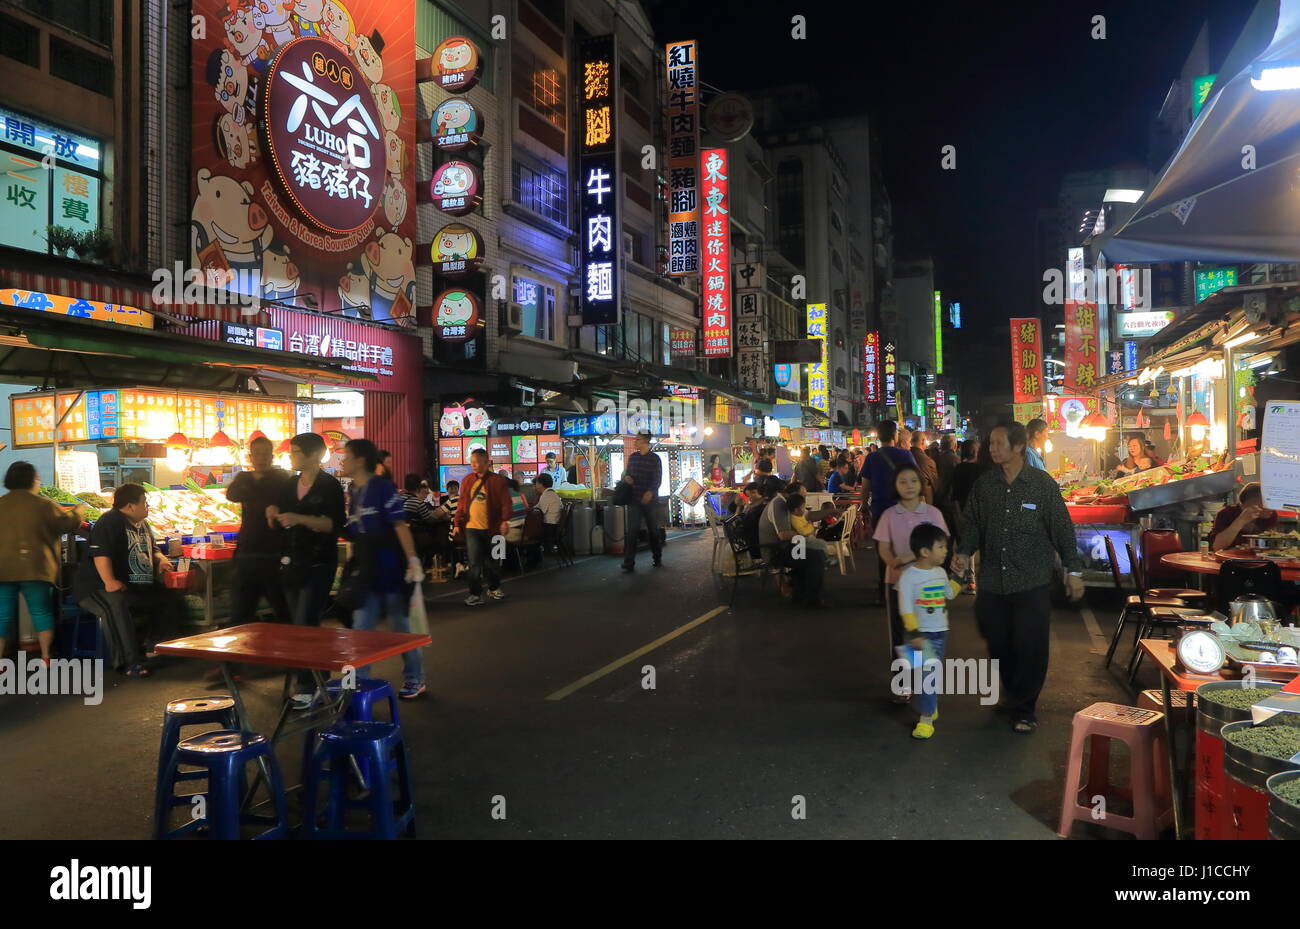 People visit Liuhe night street market in Kaohsiung Taiwan. Liuhe market is one of the most popular markets in Taiwan. Stock Photo